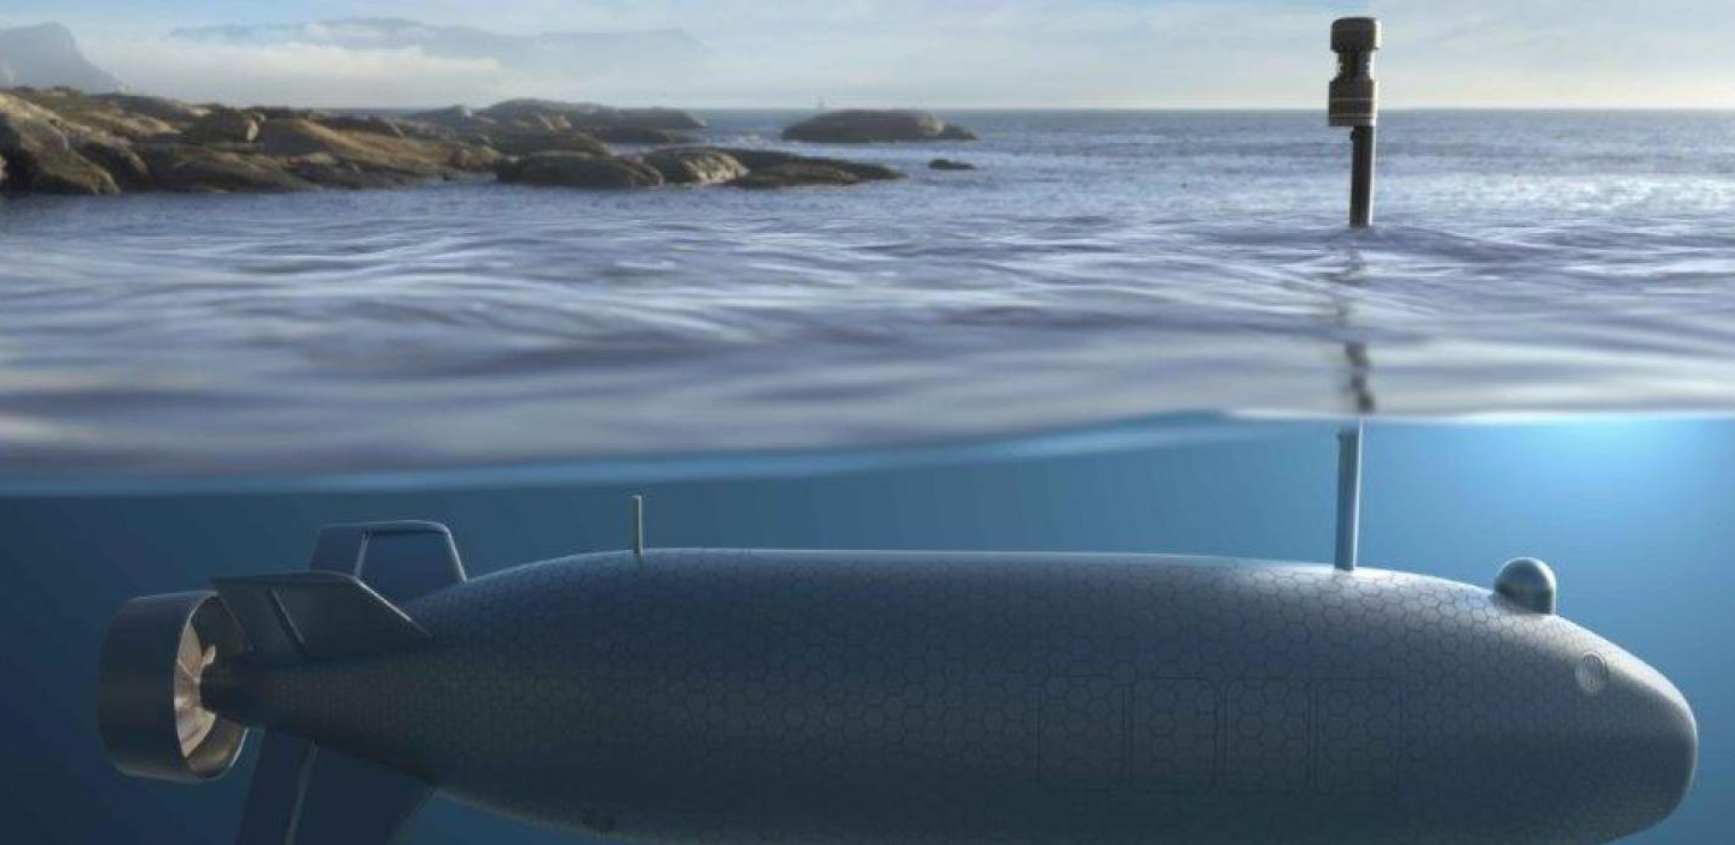 An artist's rendering of an uncrewed combat underwater vehicle. The drone is submerged underwater, while its periscope sticks out the water's surface. A rocky shore is seen over on the left side of the horizon.